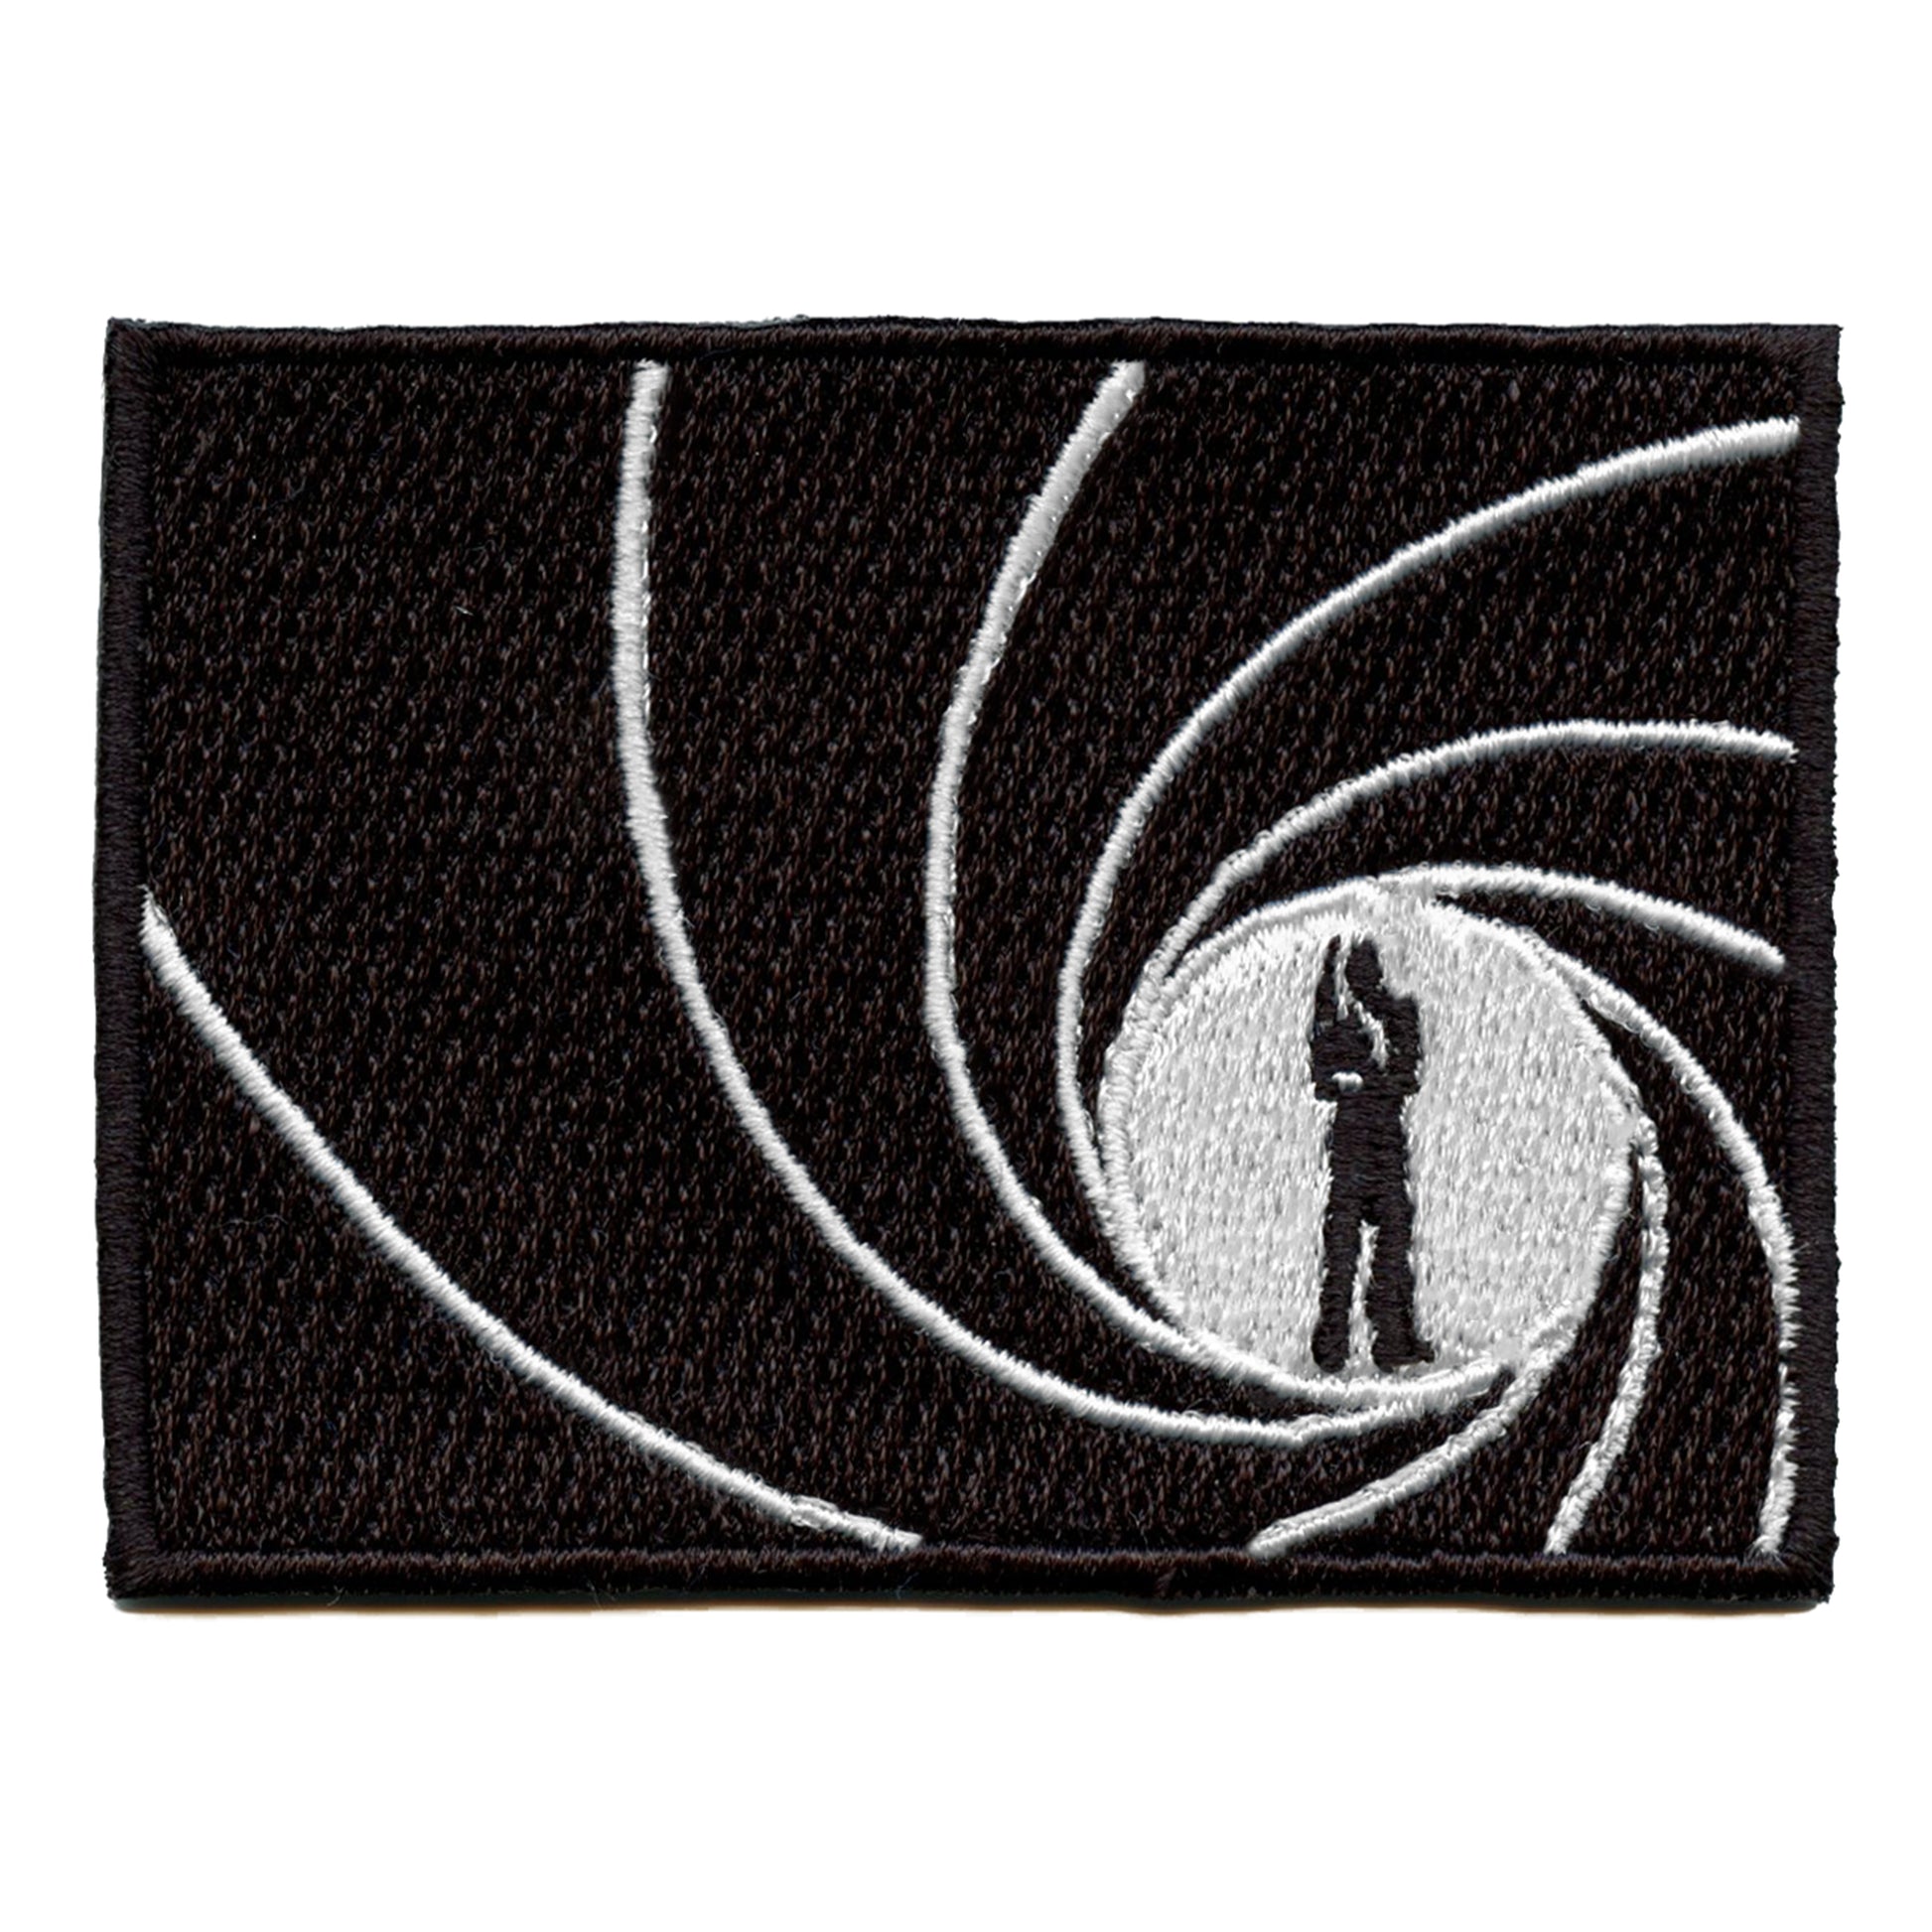 Gun Barrel Super Spy Patch Iconic Movie Image Embroidered Iron On